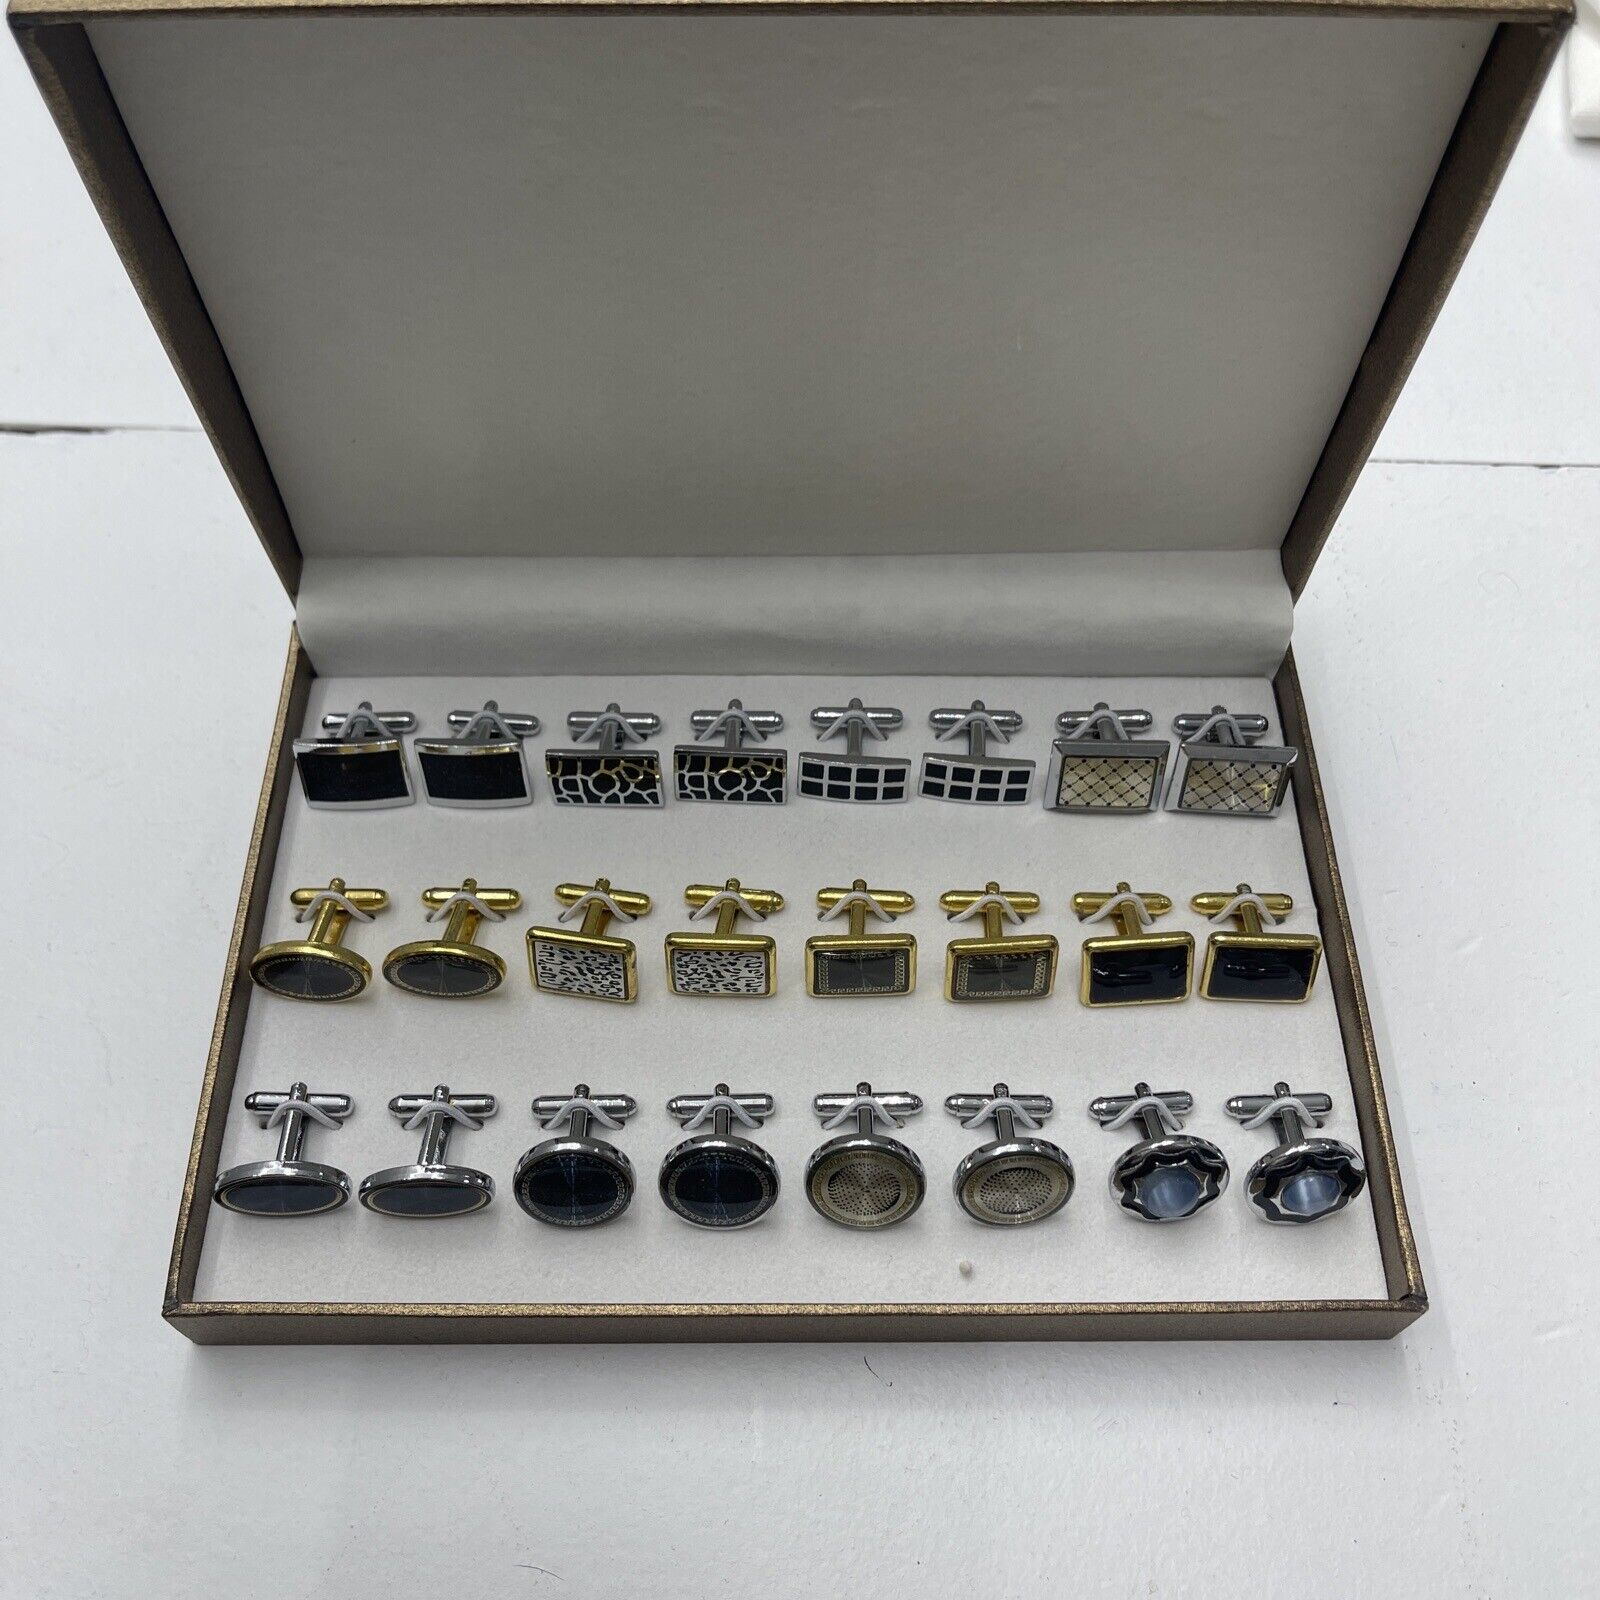 Bodyj4you 12 Pair Two Tone Cuff Links New